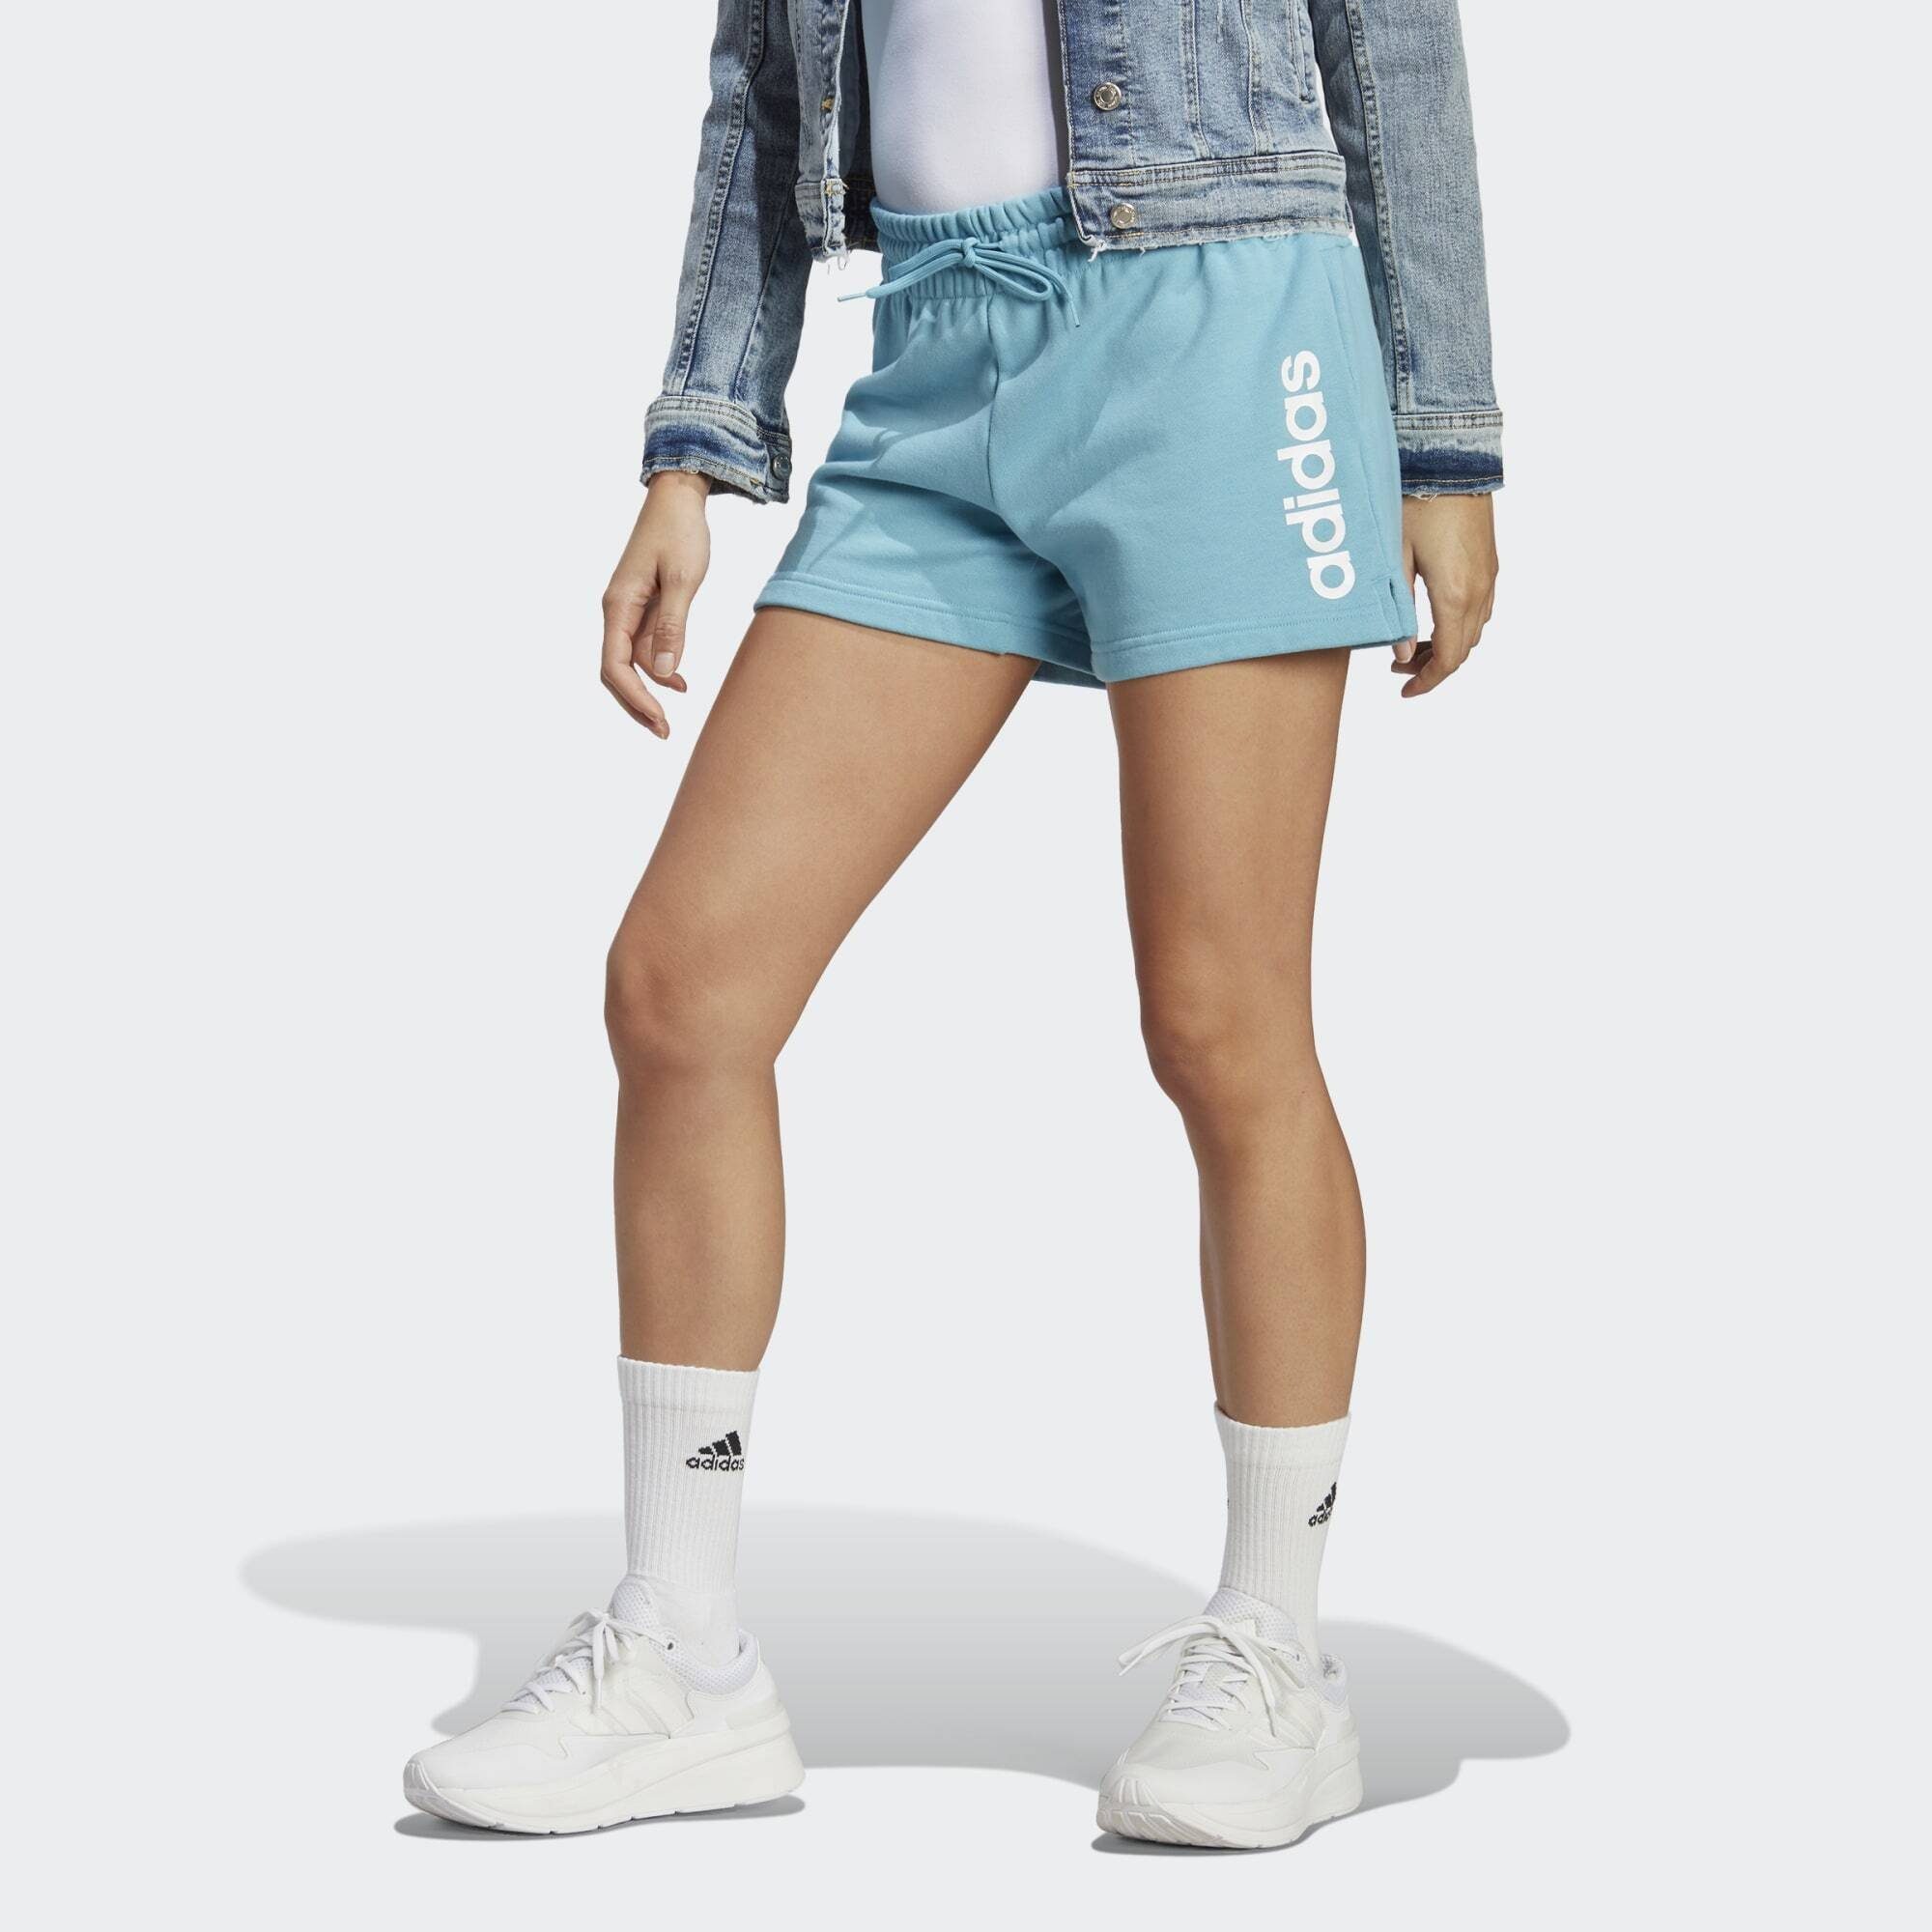 LINEAR adidas S23 / Shorts ESSENTIALS FRENCH TERRY Sportswear Preloved SHORTS Blue White